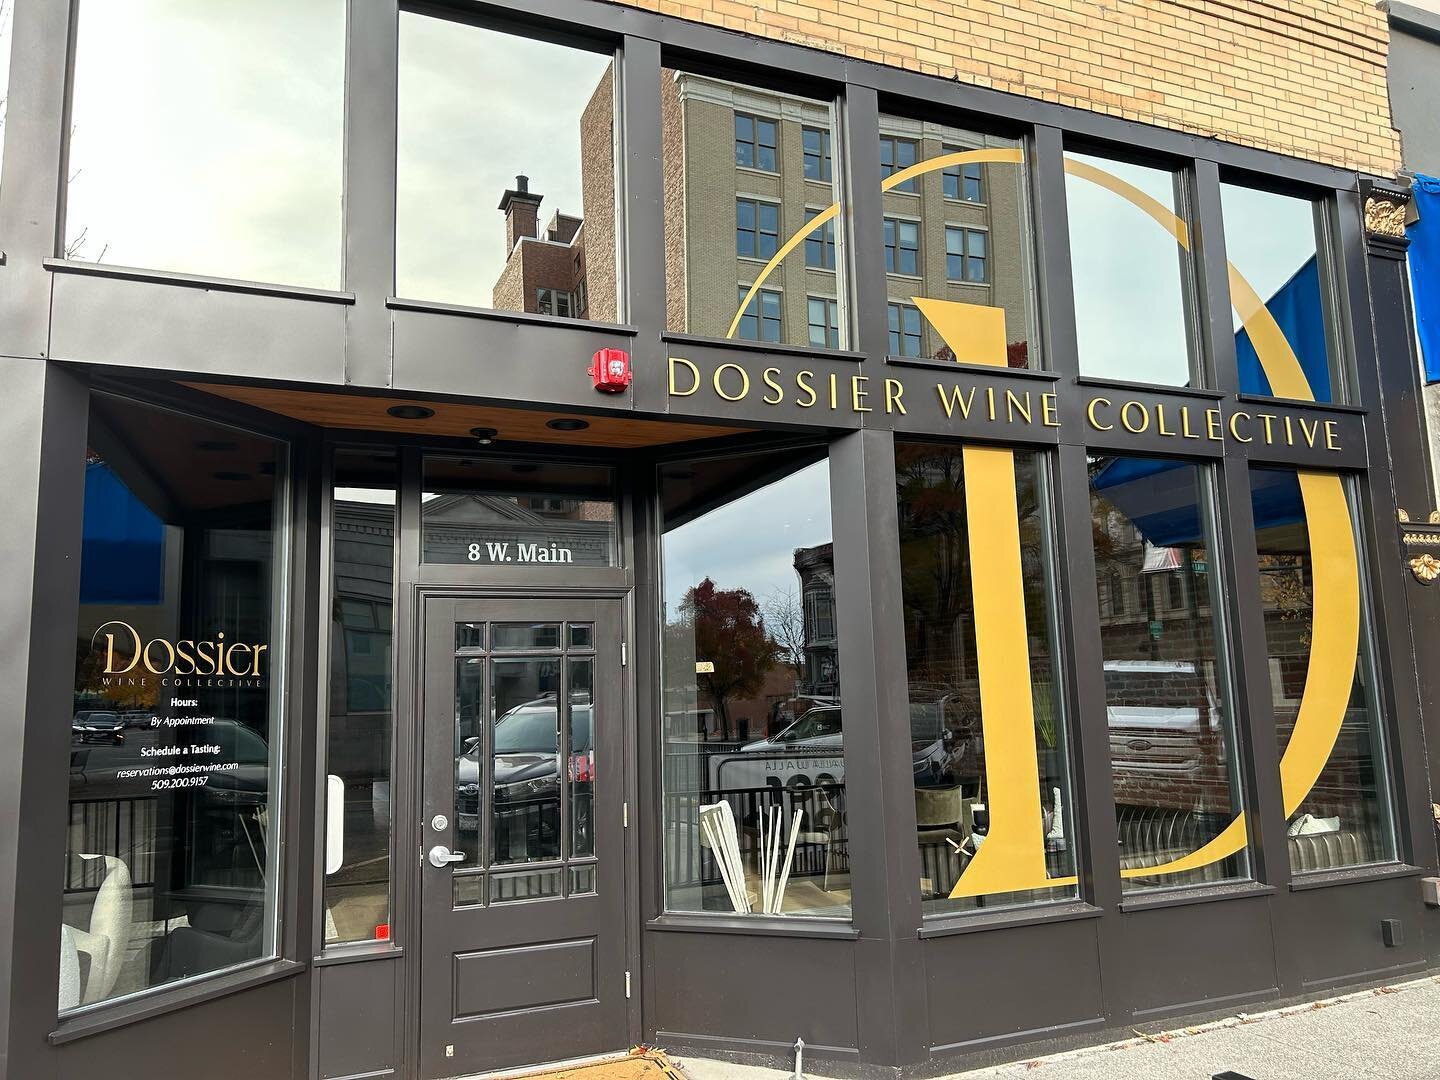 Kudos to the Dossier Wine Collective team on their first tasting room opening in downtown Walla Walla. This is one sexy space&mdash;the perfect spot to lounge and enjoy these beautiful wines. Exciting things ahead for this new brand. @timlenihanhomes